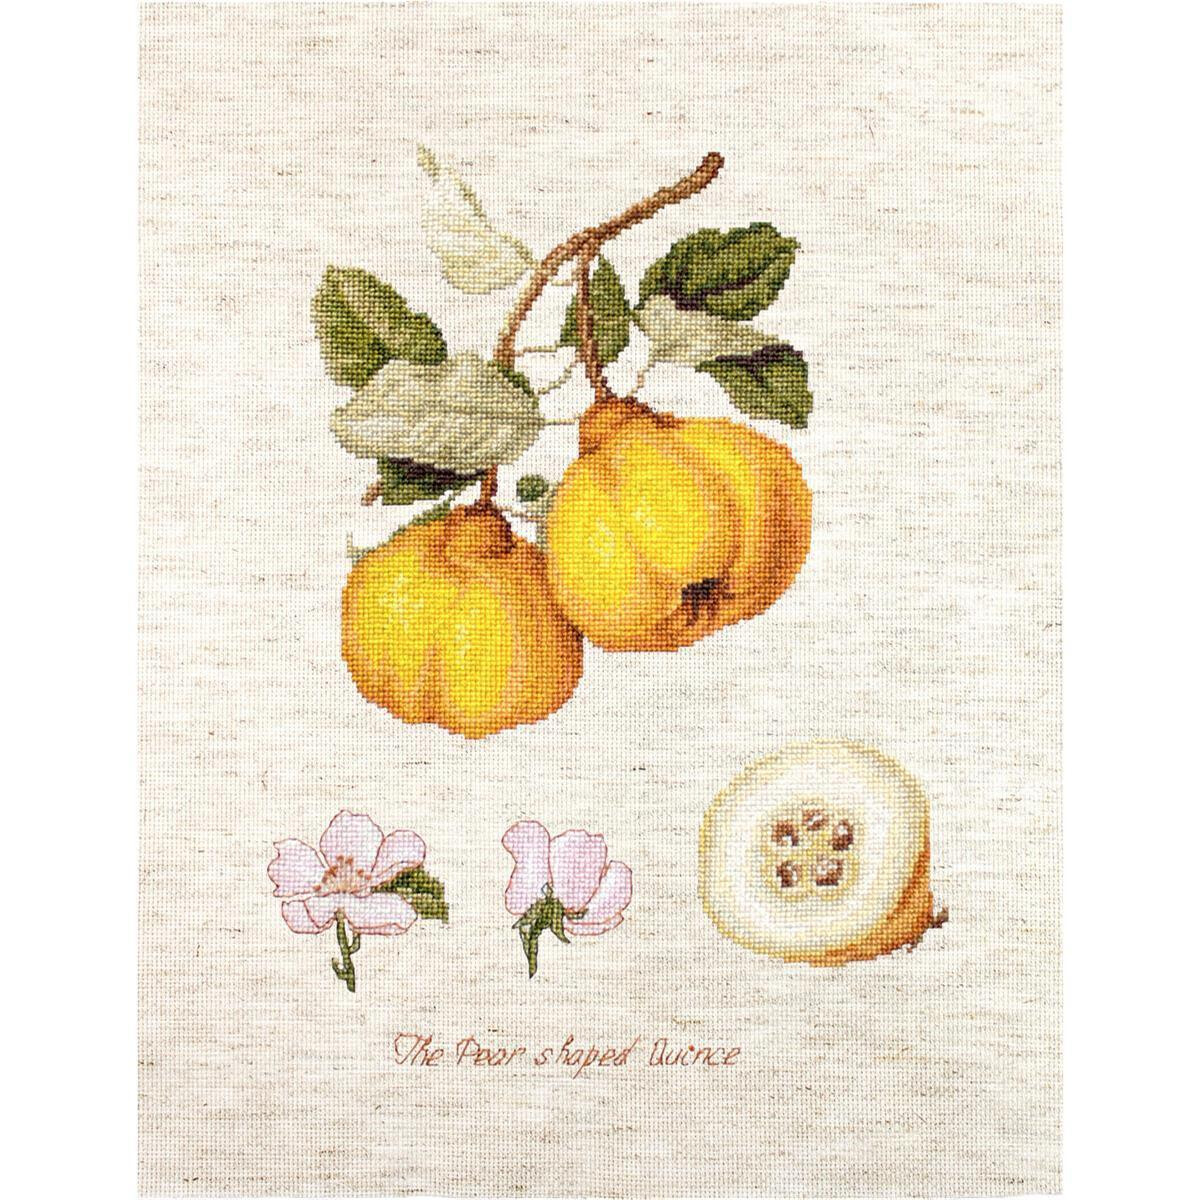 Luca-s counted cross stitch kit "The Pear shaped...